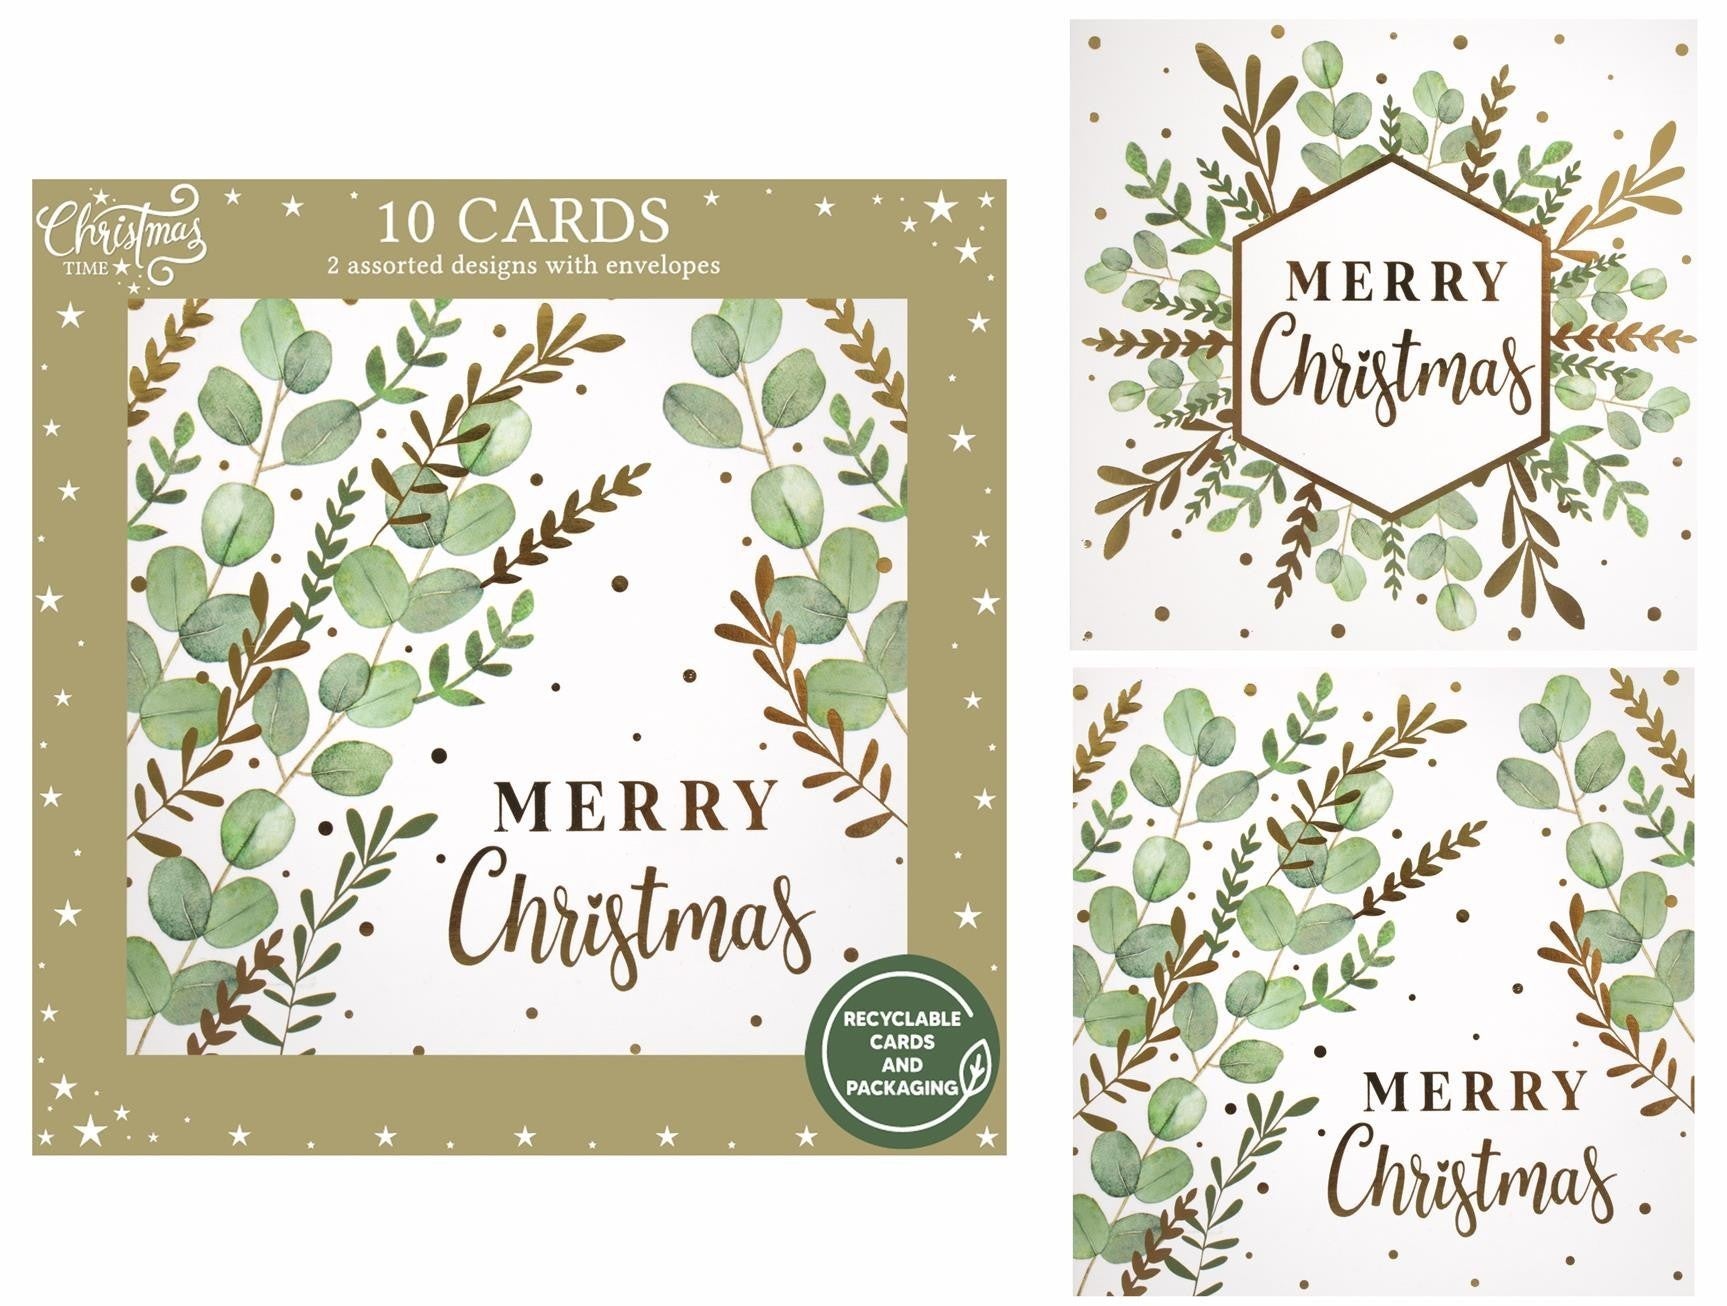 View Eucalyptus Christmas Cards Pack of 10 information